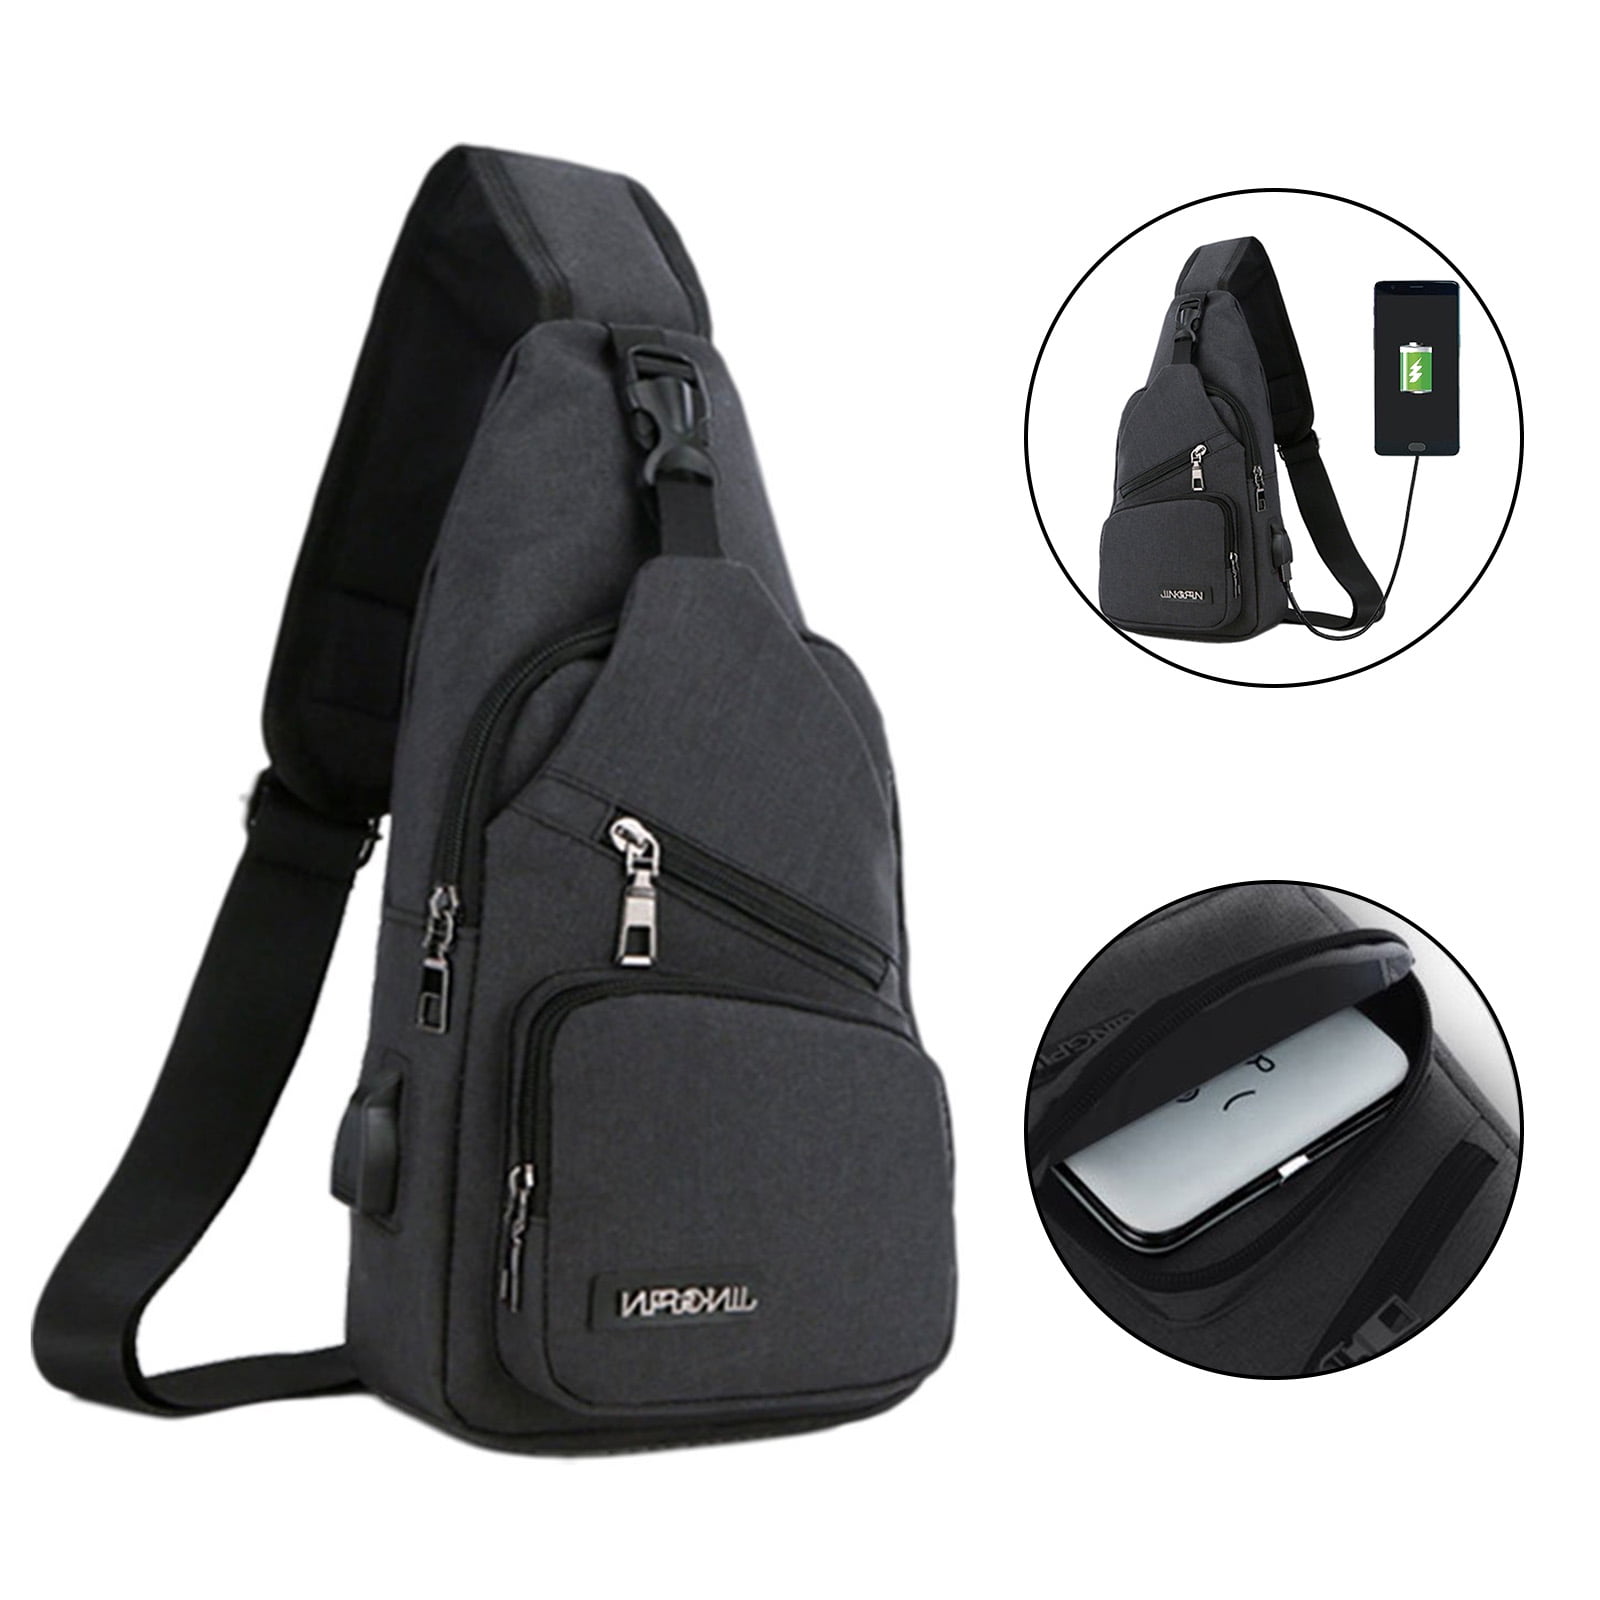 Men Women Small Sling Bag Nylon Water Resistant One Strap Backpack Shoulder Crossbody Bags with USB Charging Port Black